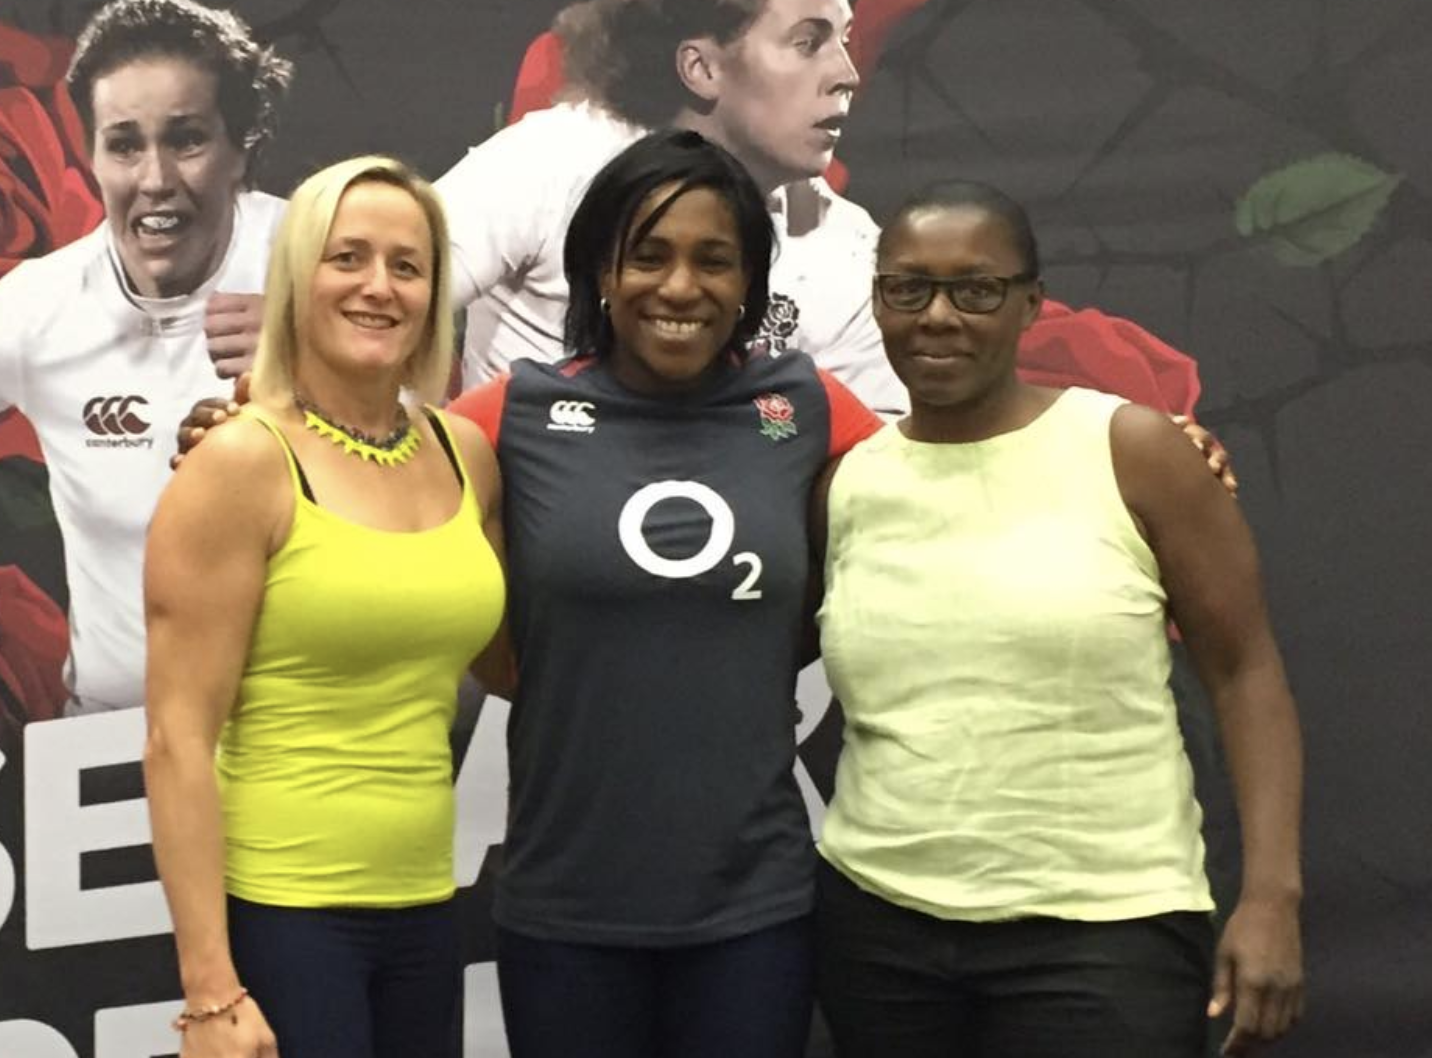 Maxine Bromley (right) stands with didi rugby founder and CEO Vicky Macqueen (left) and former England flanker Maggie Alphonsi